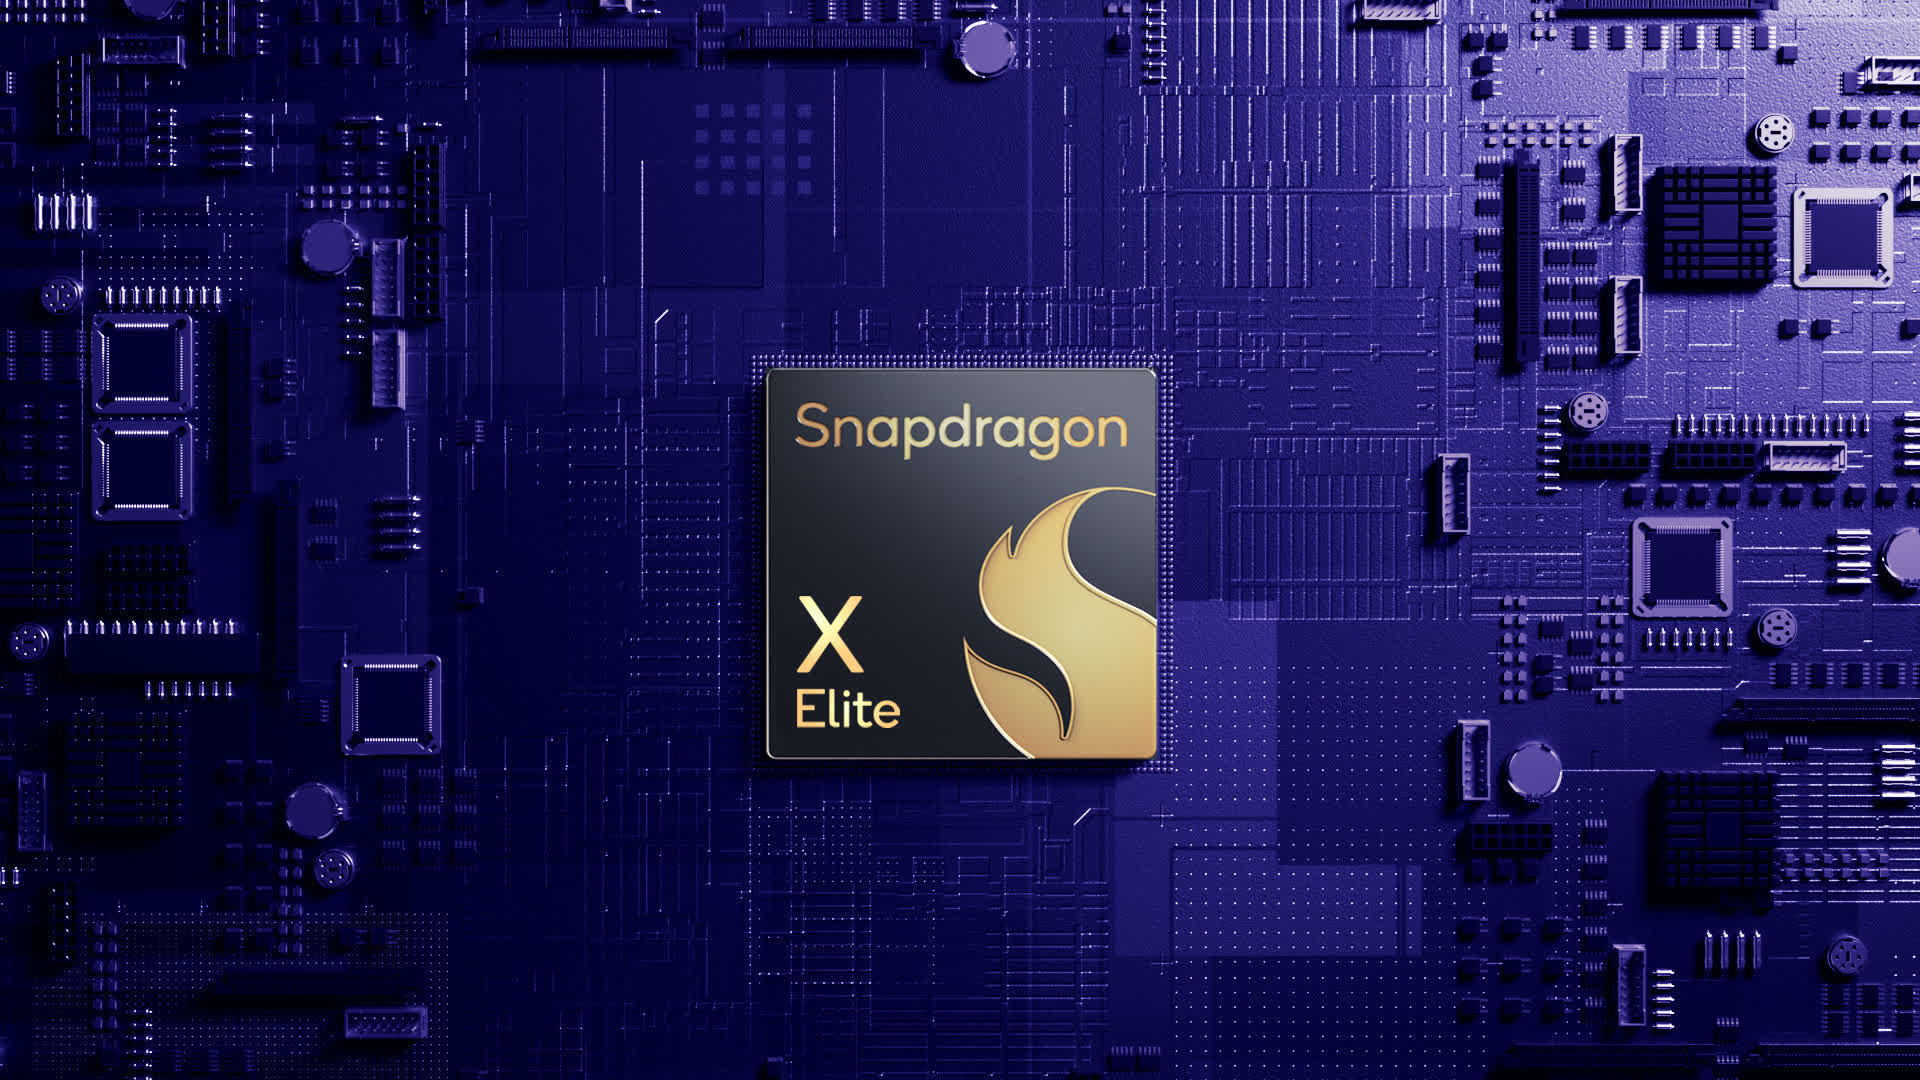 Snapdragon X Elite's first real-world benchmarks can't even beat an older iPhone, but a fix may be out soon